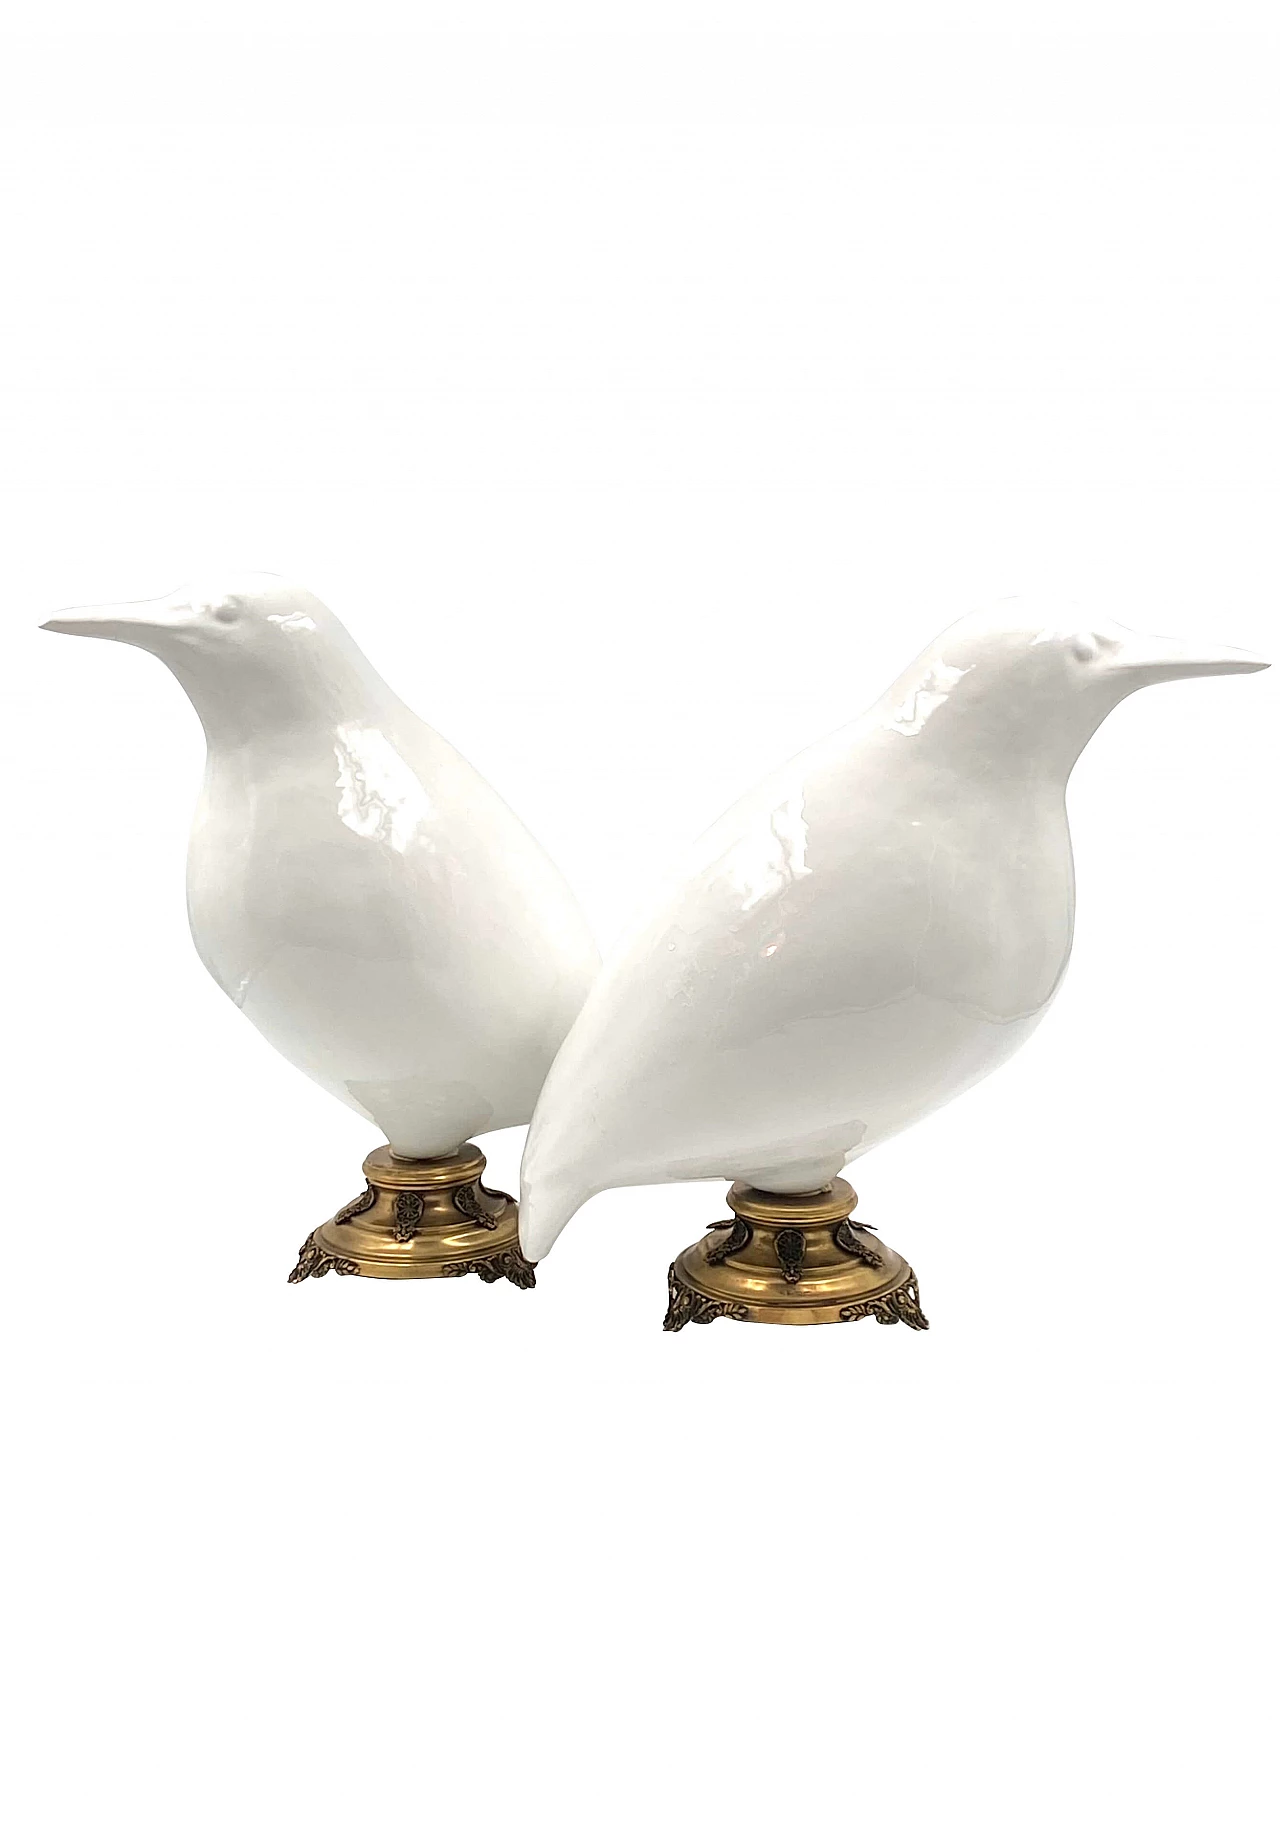 Pair of large ceramic and brass bird sculptures, early 20th century 1330642